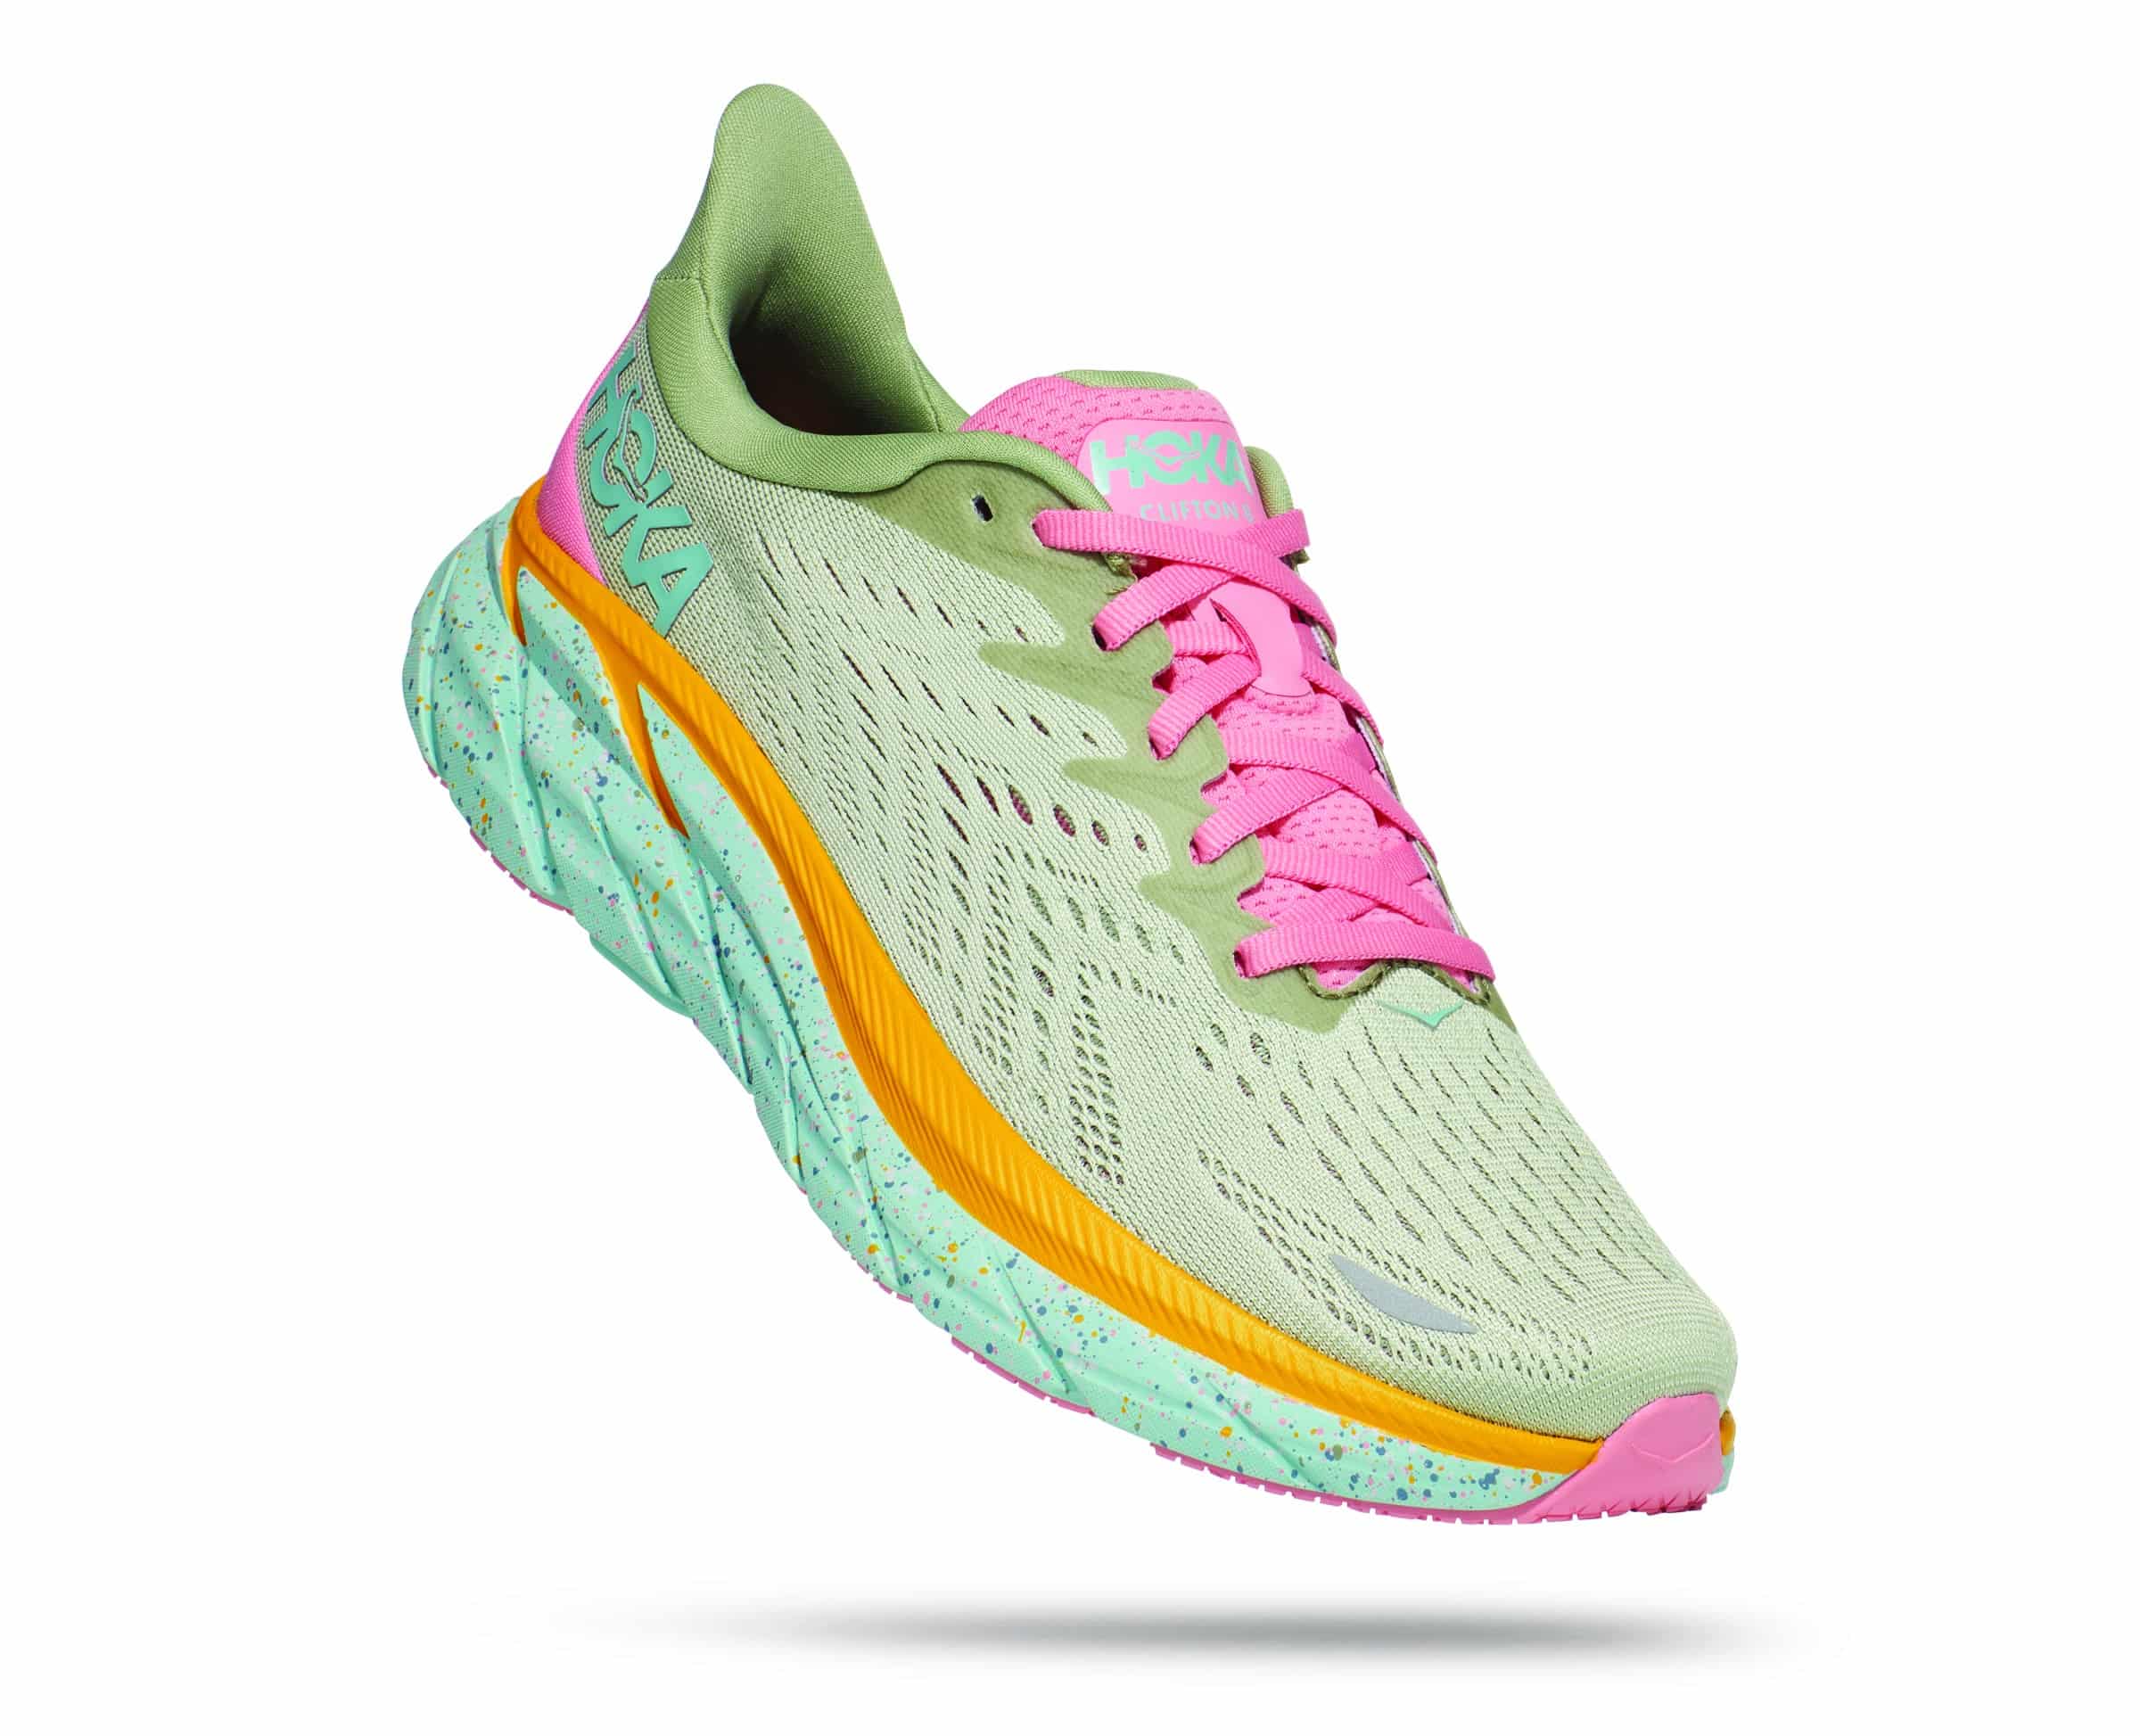 FP Movement To Collaborate With HOKA On Exclusive Collection | Sustain ...